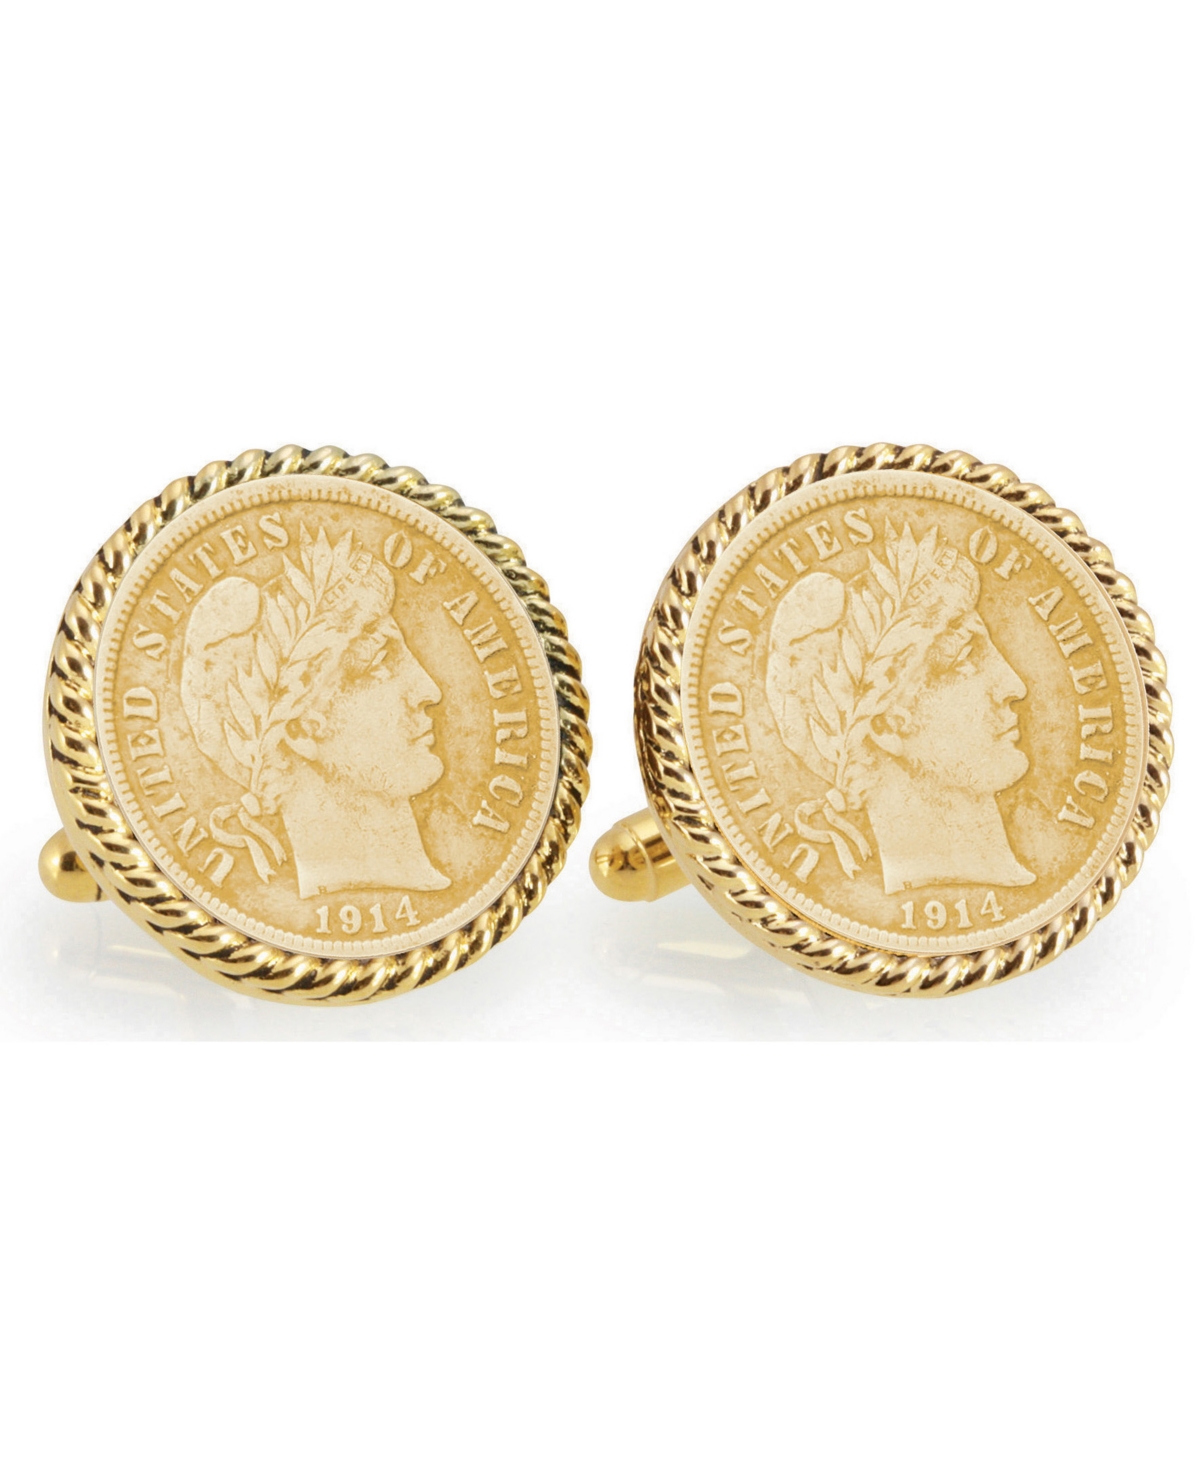 Gold-Layered Silver Barber Dime Rope Bezel Coin Cuff Links - Gold